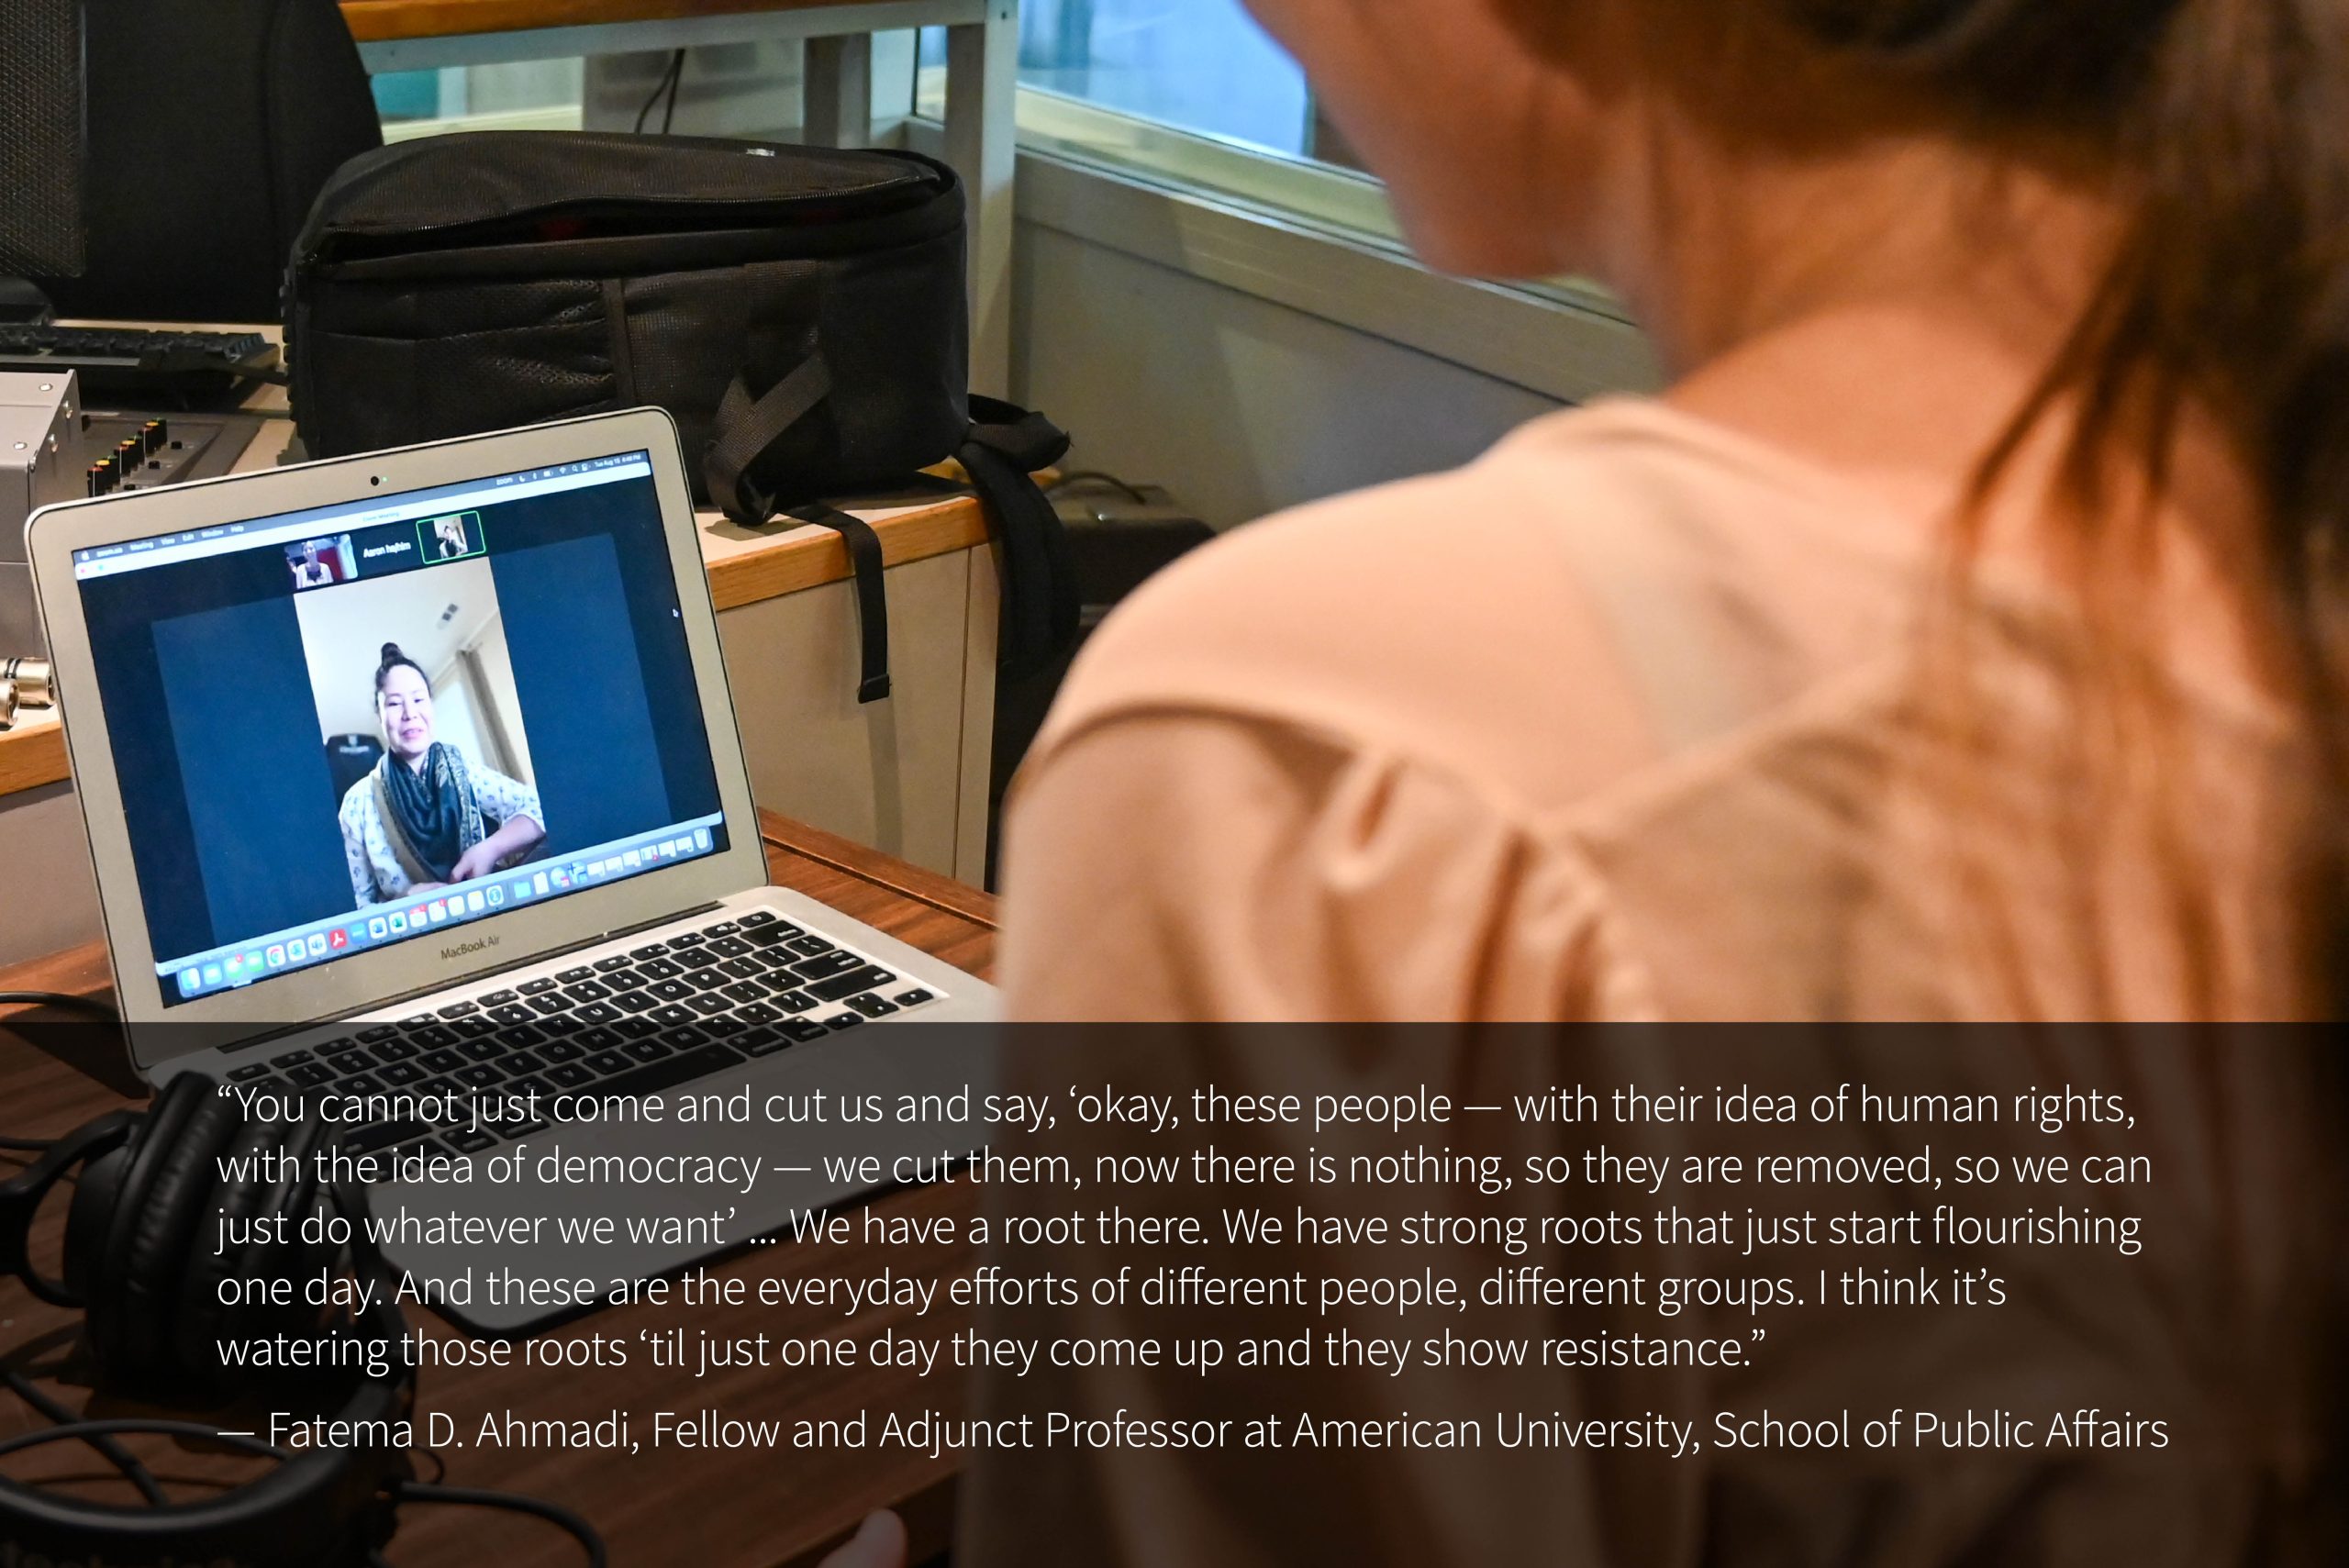 Photo of a laptop Fatema D. Ahmadi on a Zoom video call, taken from over the shoulder of Chelsea Klassen, who is looking at the laptop. A quote reads: "“You cannot just come and cut us and say, ‘okay, these people — with their idea of human rights, with the idea of democracy — we cut them, now there is nothing, so they are removed, so we can just do whatever we want’ ... We have a root there. We have strong roots that just start flourishing one day. And these are the everyday efforts of different people, different groups. I think it’s watering those roots ‘til just one day they come up and they show resistance.” — Fatema D. Ahmadi, Fellow and Adjunct Professor at American University, School of Public Affairs"